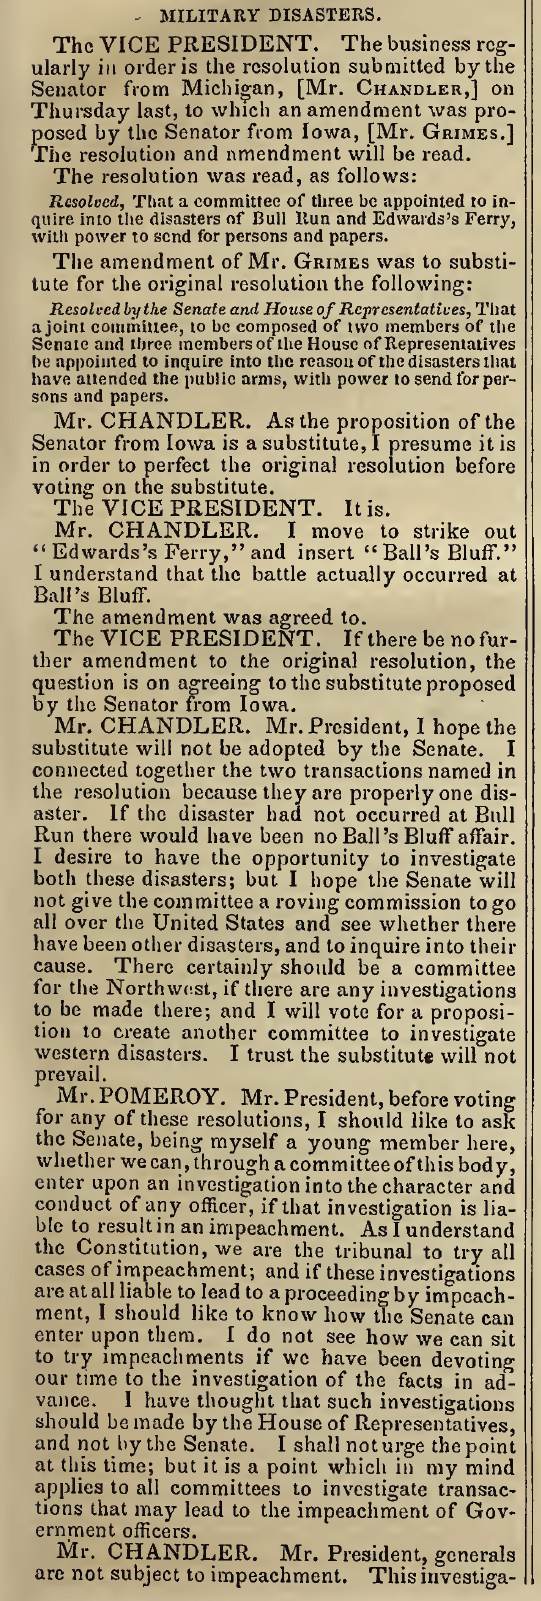 Congressmen move to establish an oversight committee after the disasters at Bull Run and Ball's Bluff - Congressional Globe December 9, 1861